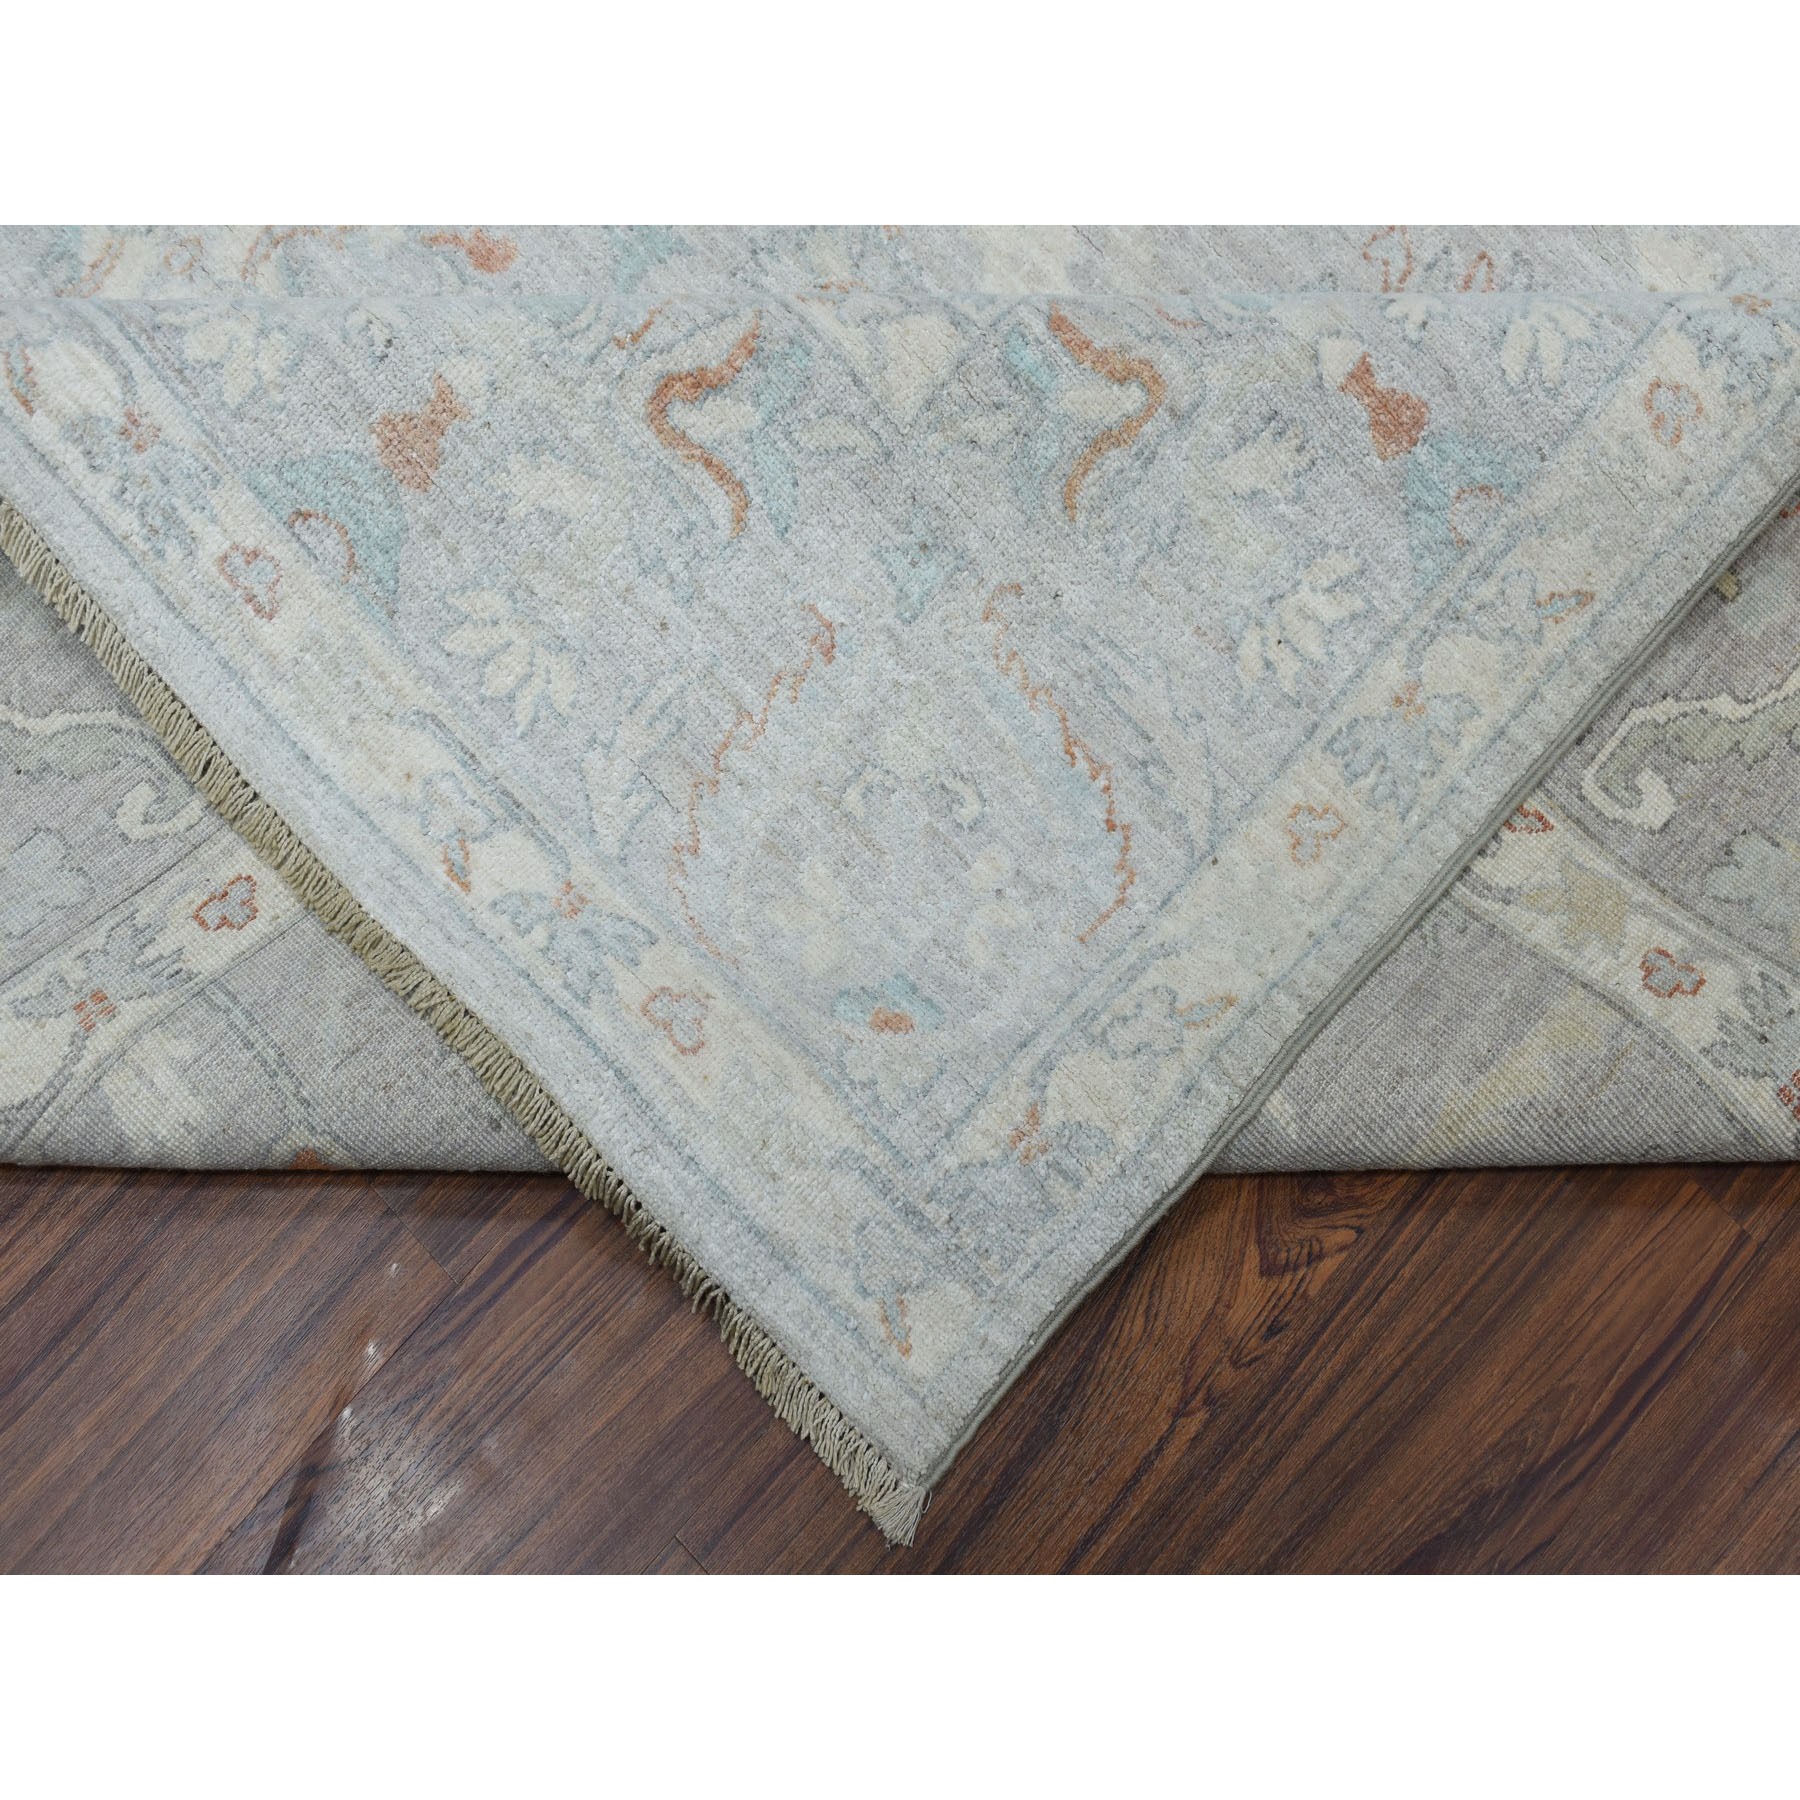 8-9 x11- White Wash Peshawar Pure Wool Hand Knotted Oriental Rug 